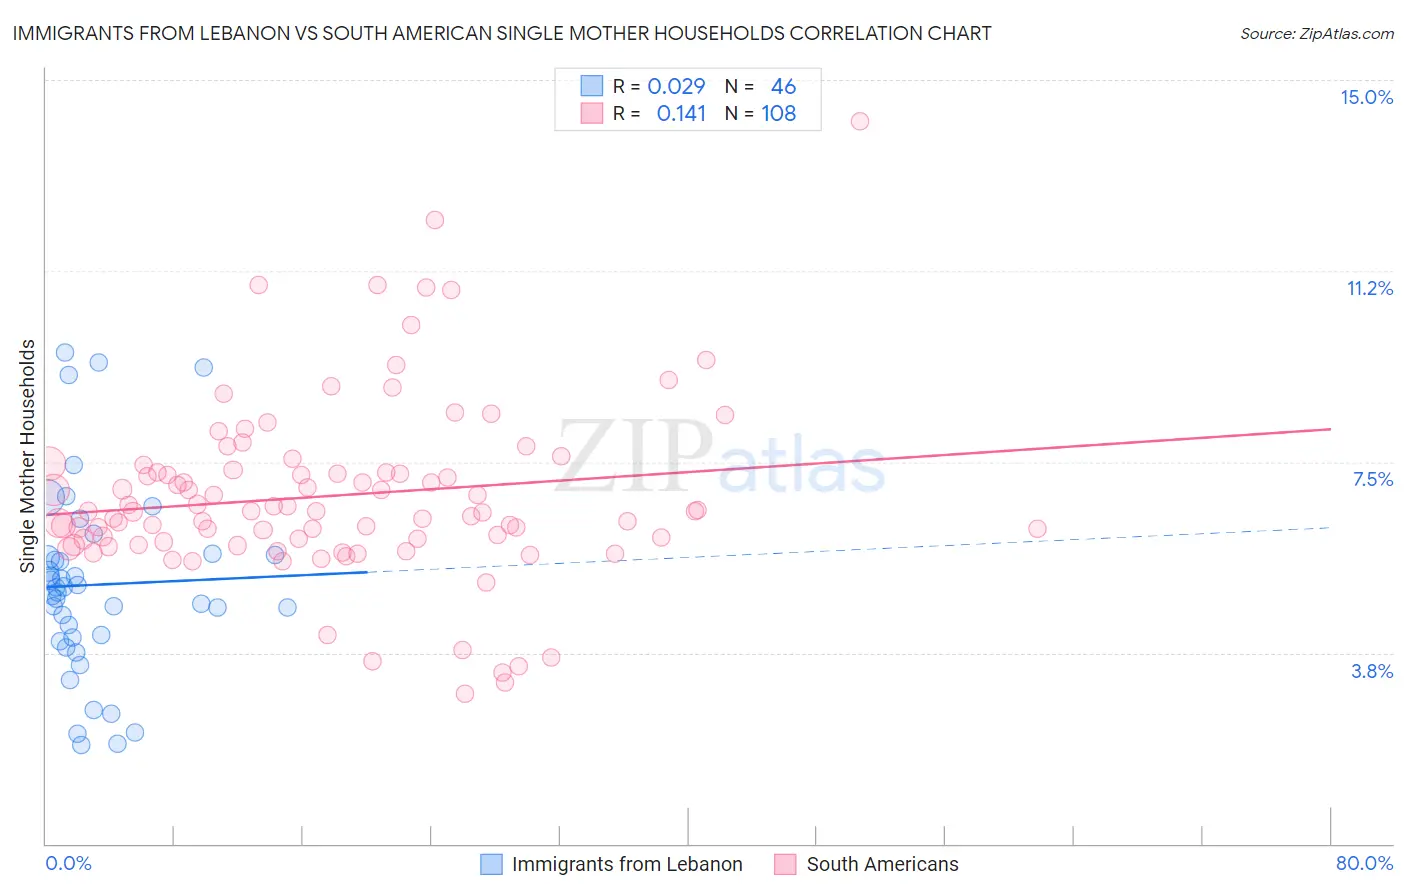 Immigrants from Lebanon vs South American Single Mother Households